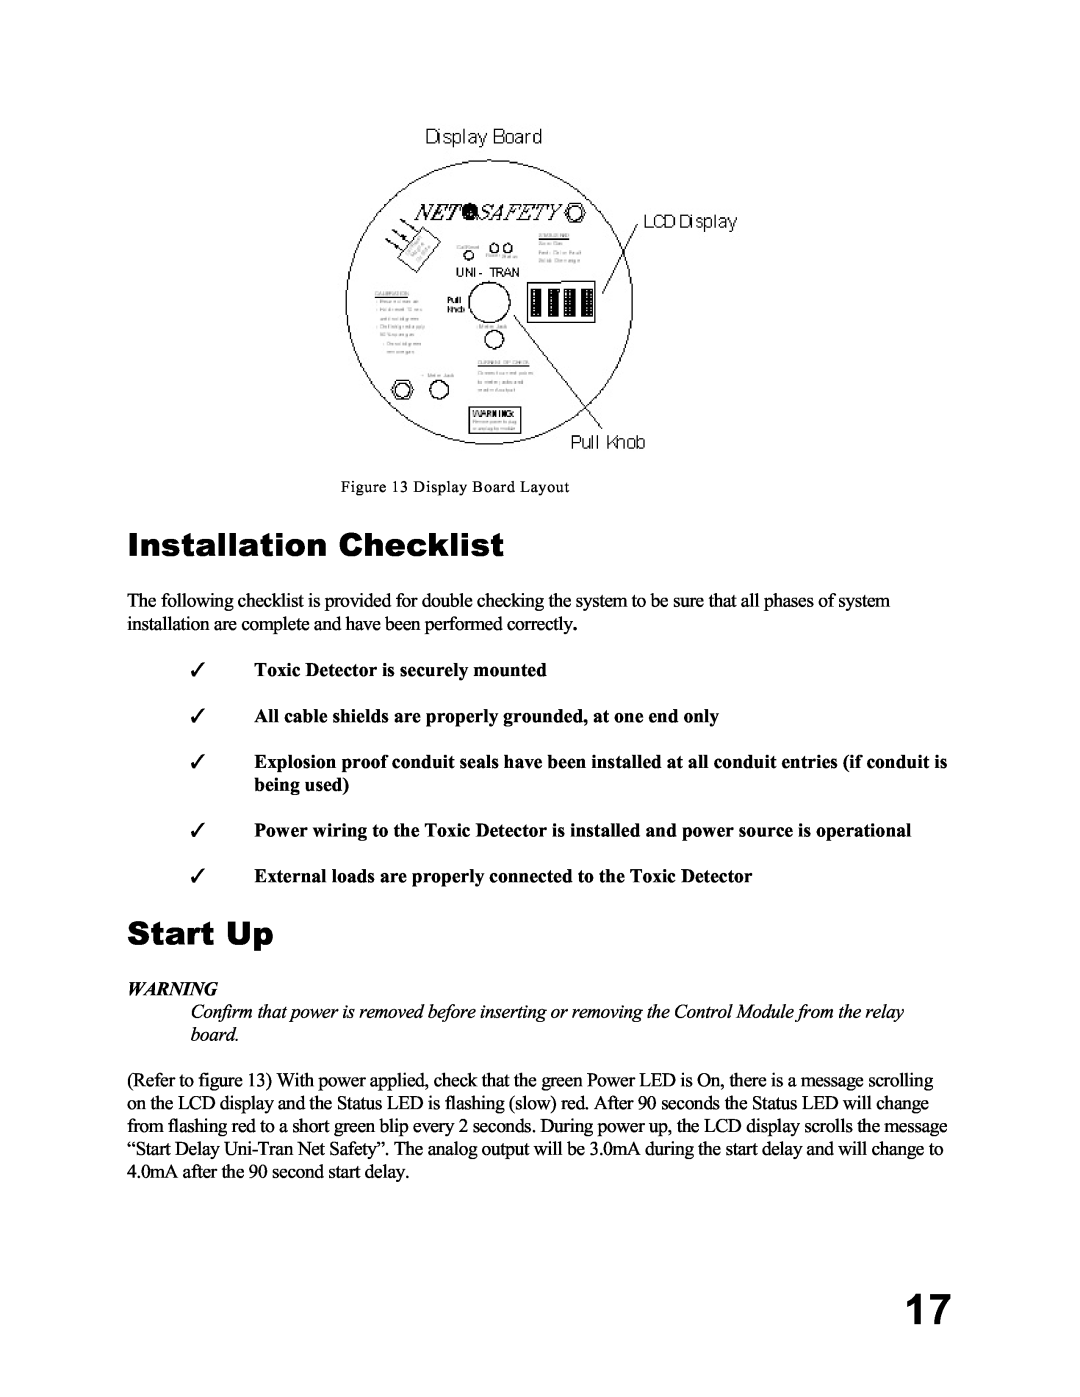 Emerson MA N-00 05-00, UT-P+-STXXXX user manual Installation Checklist, Start Up, TToxic Detector is securely mounted 